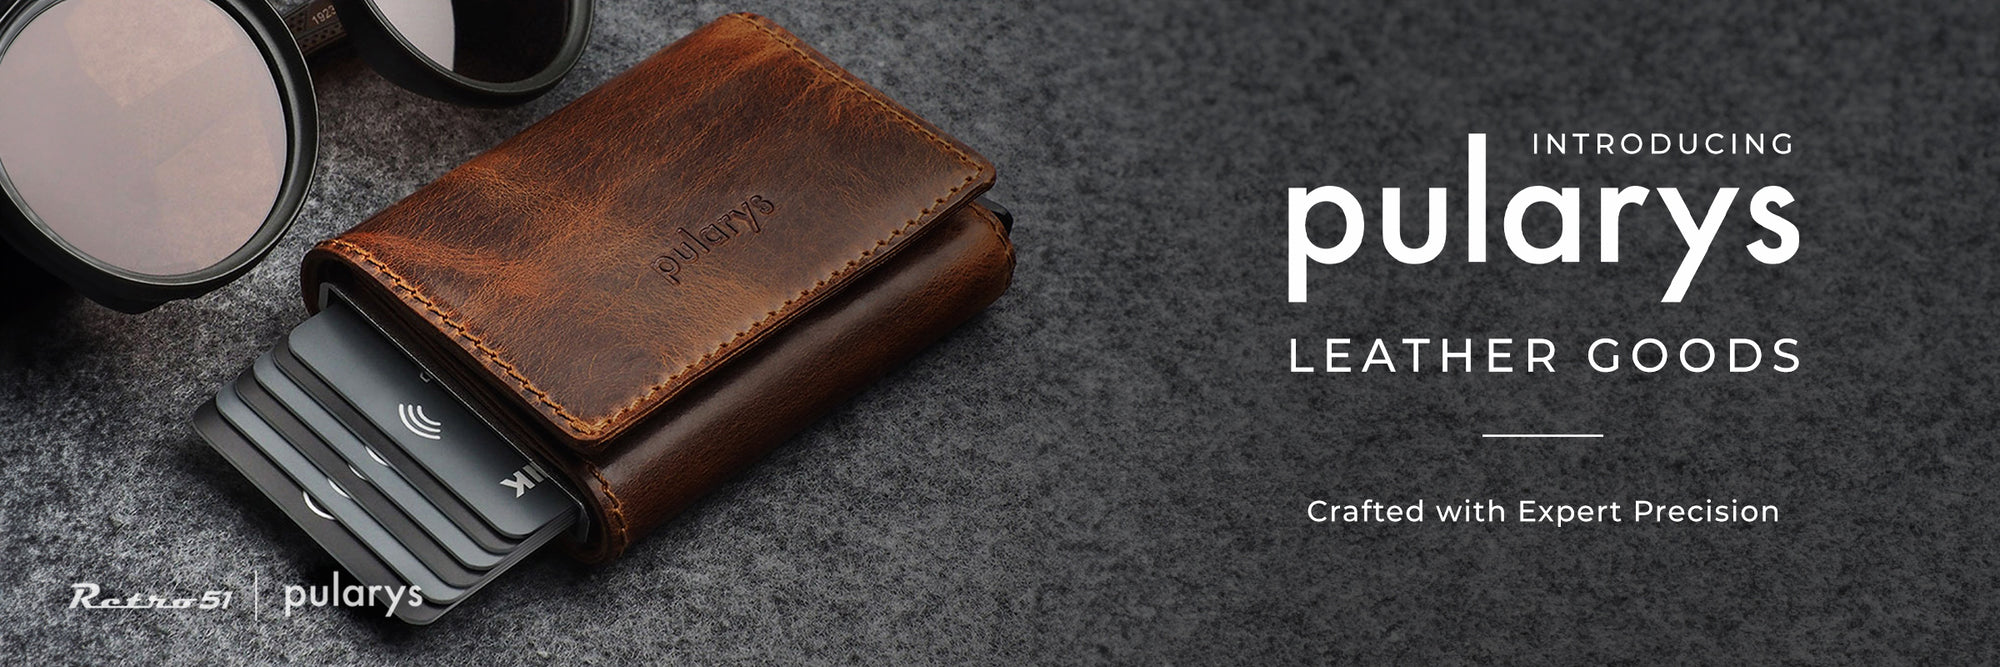 Introducing Pularys Leather Goods - Crafted with Expert Precision